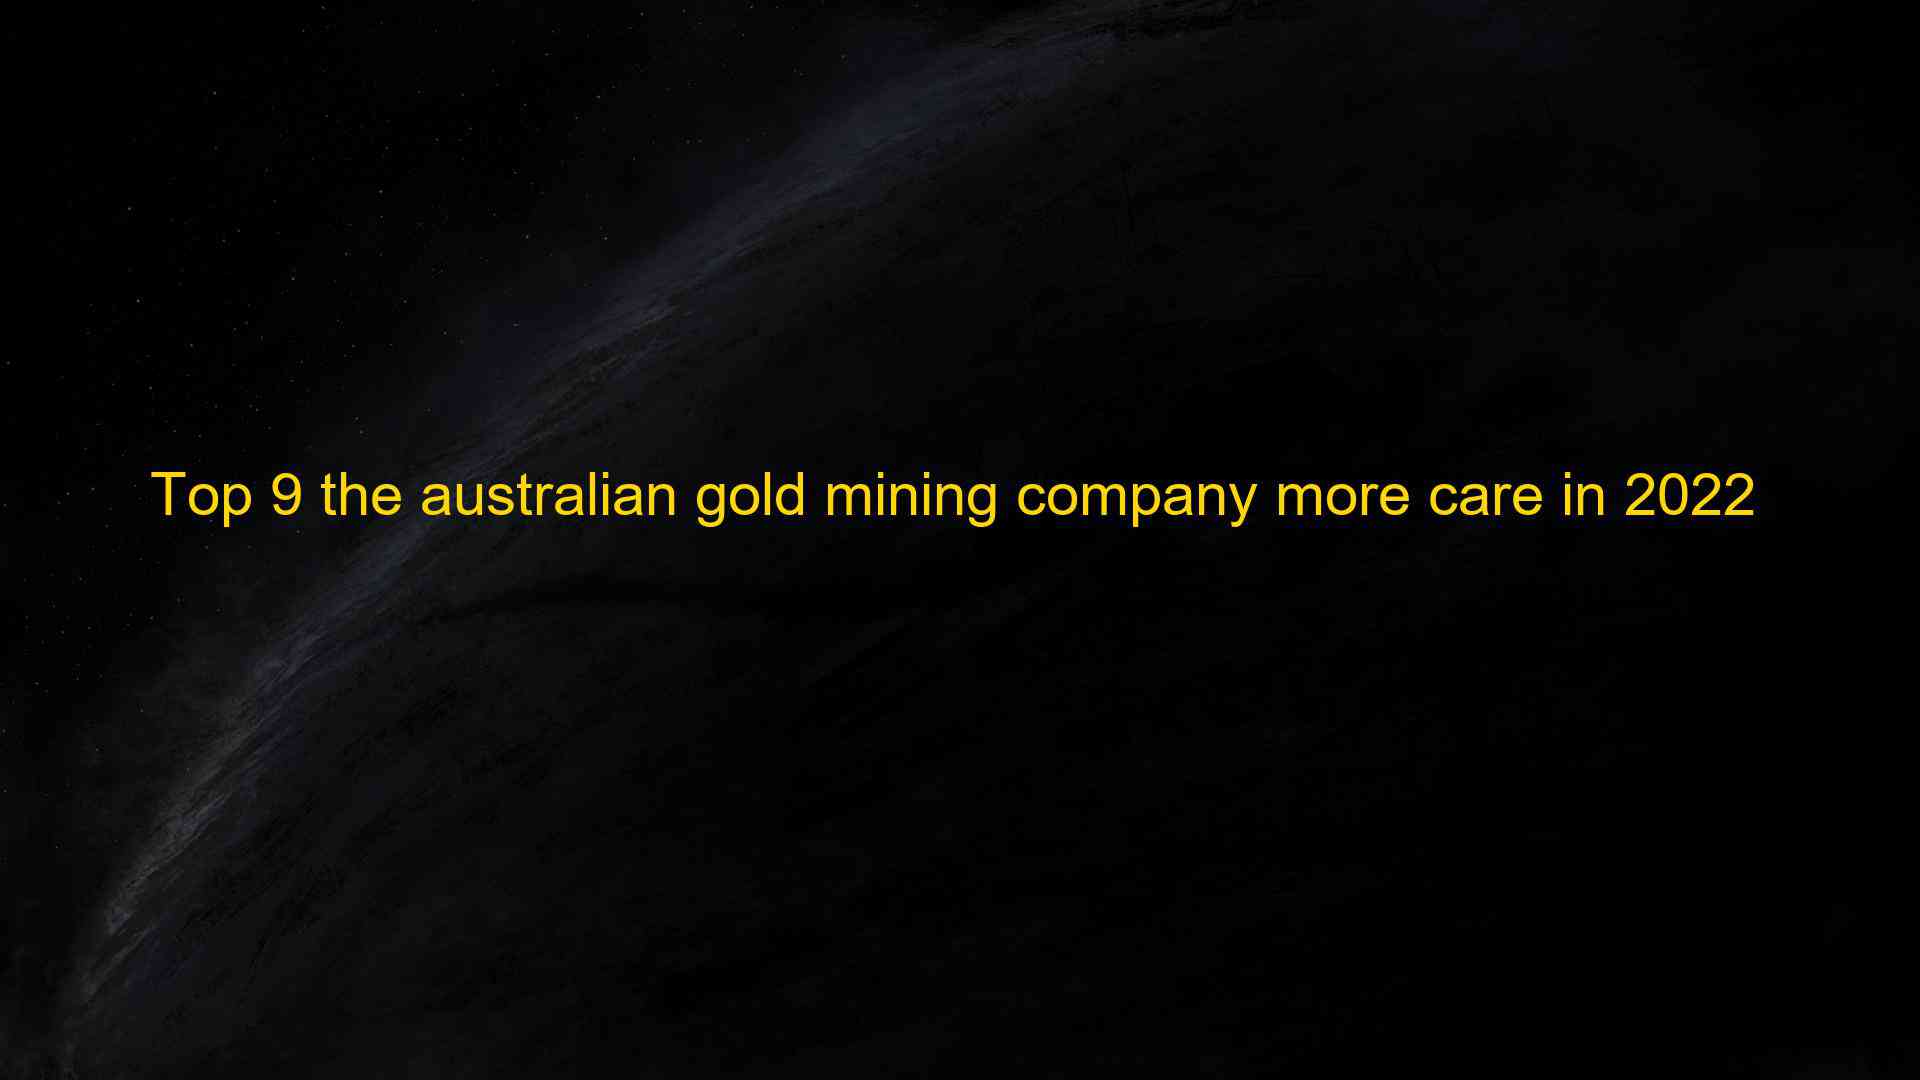 Top 9 the australian gold mining company more care in 2022 1660040693